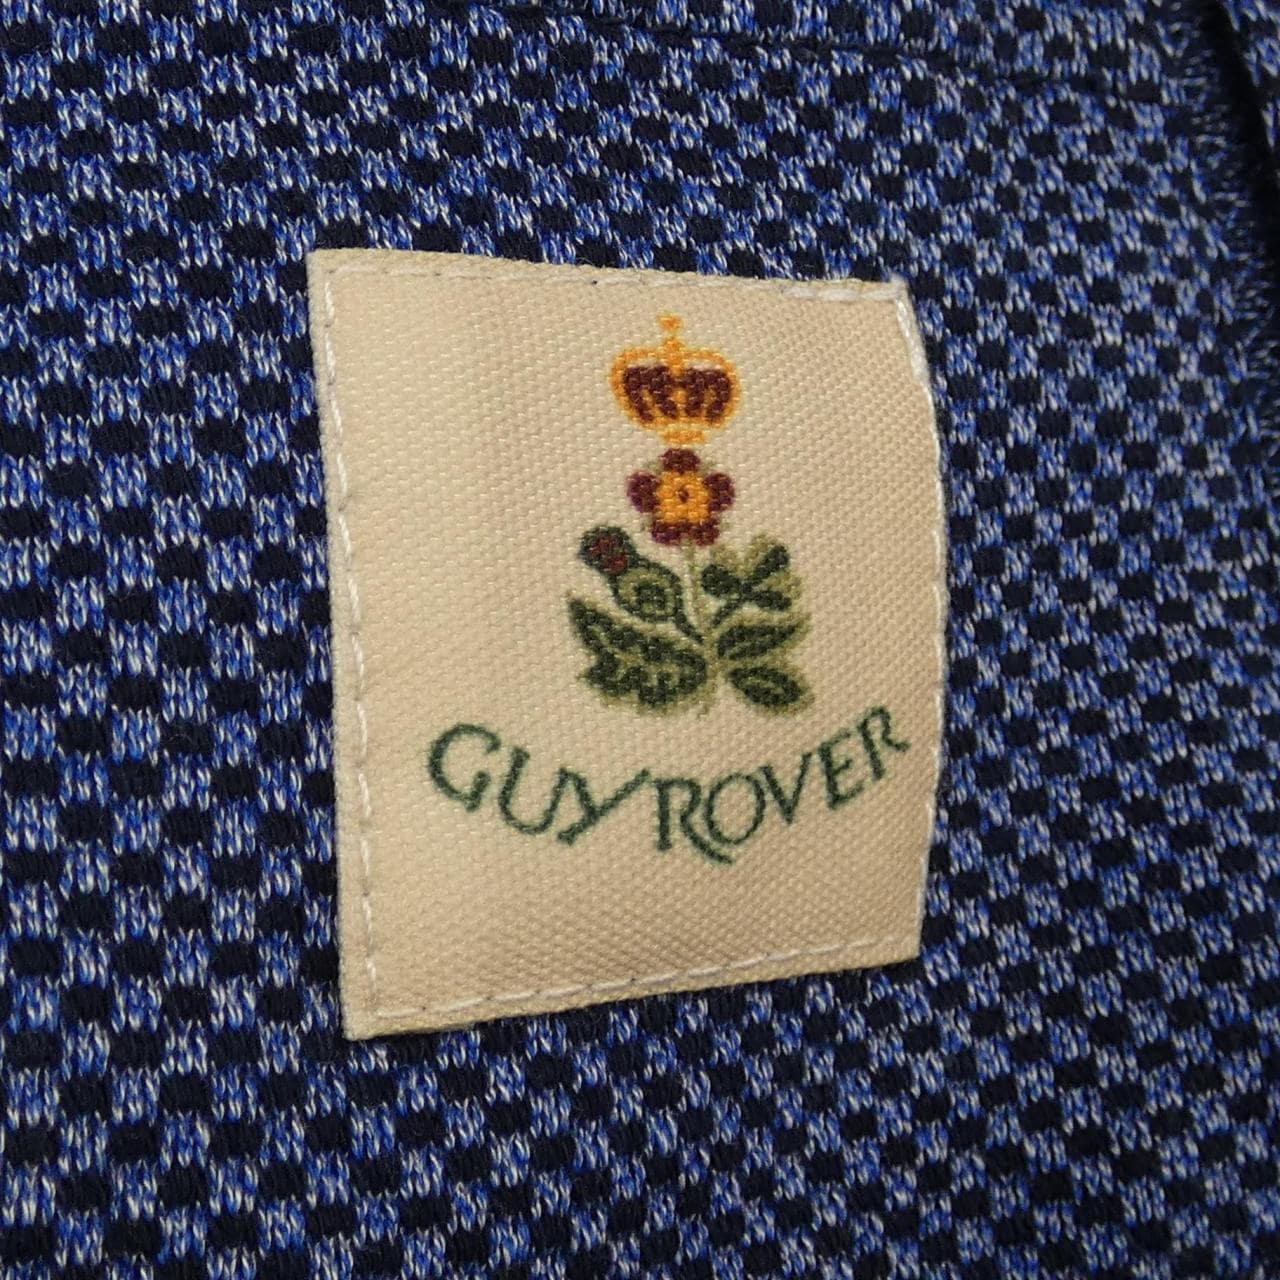 GUY ROVER Tailored Jacket